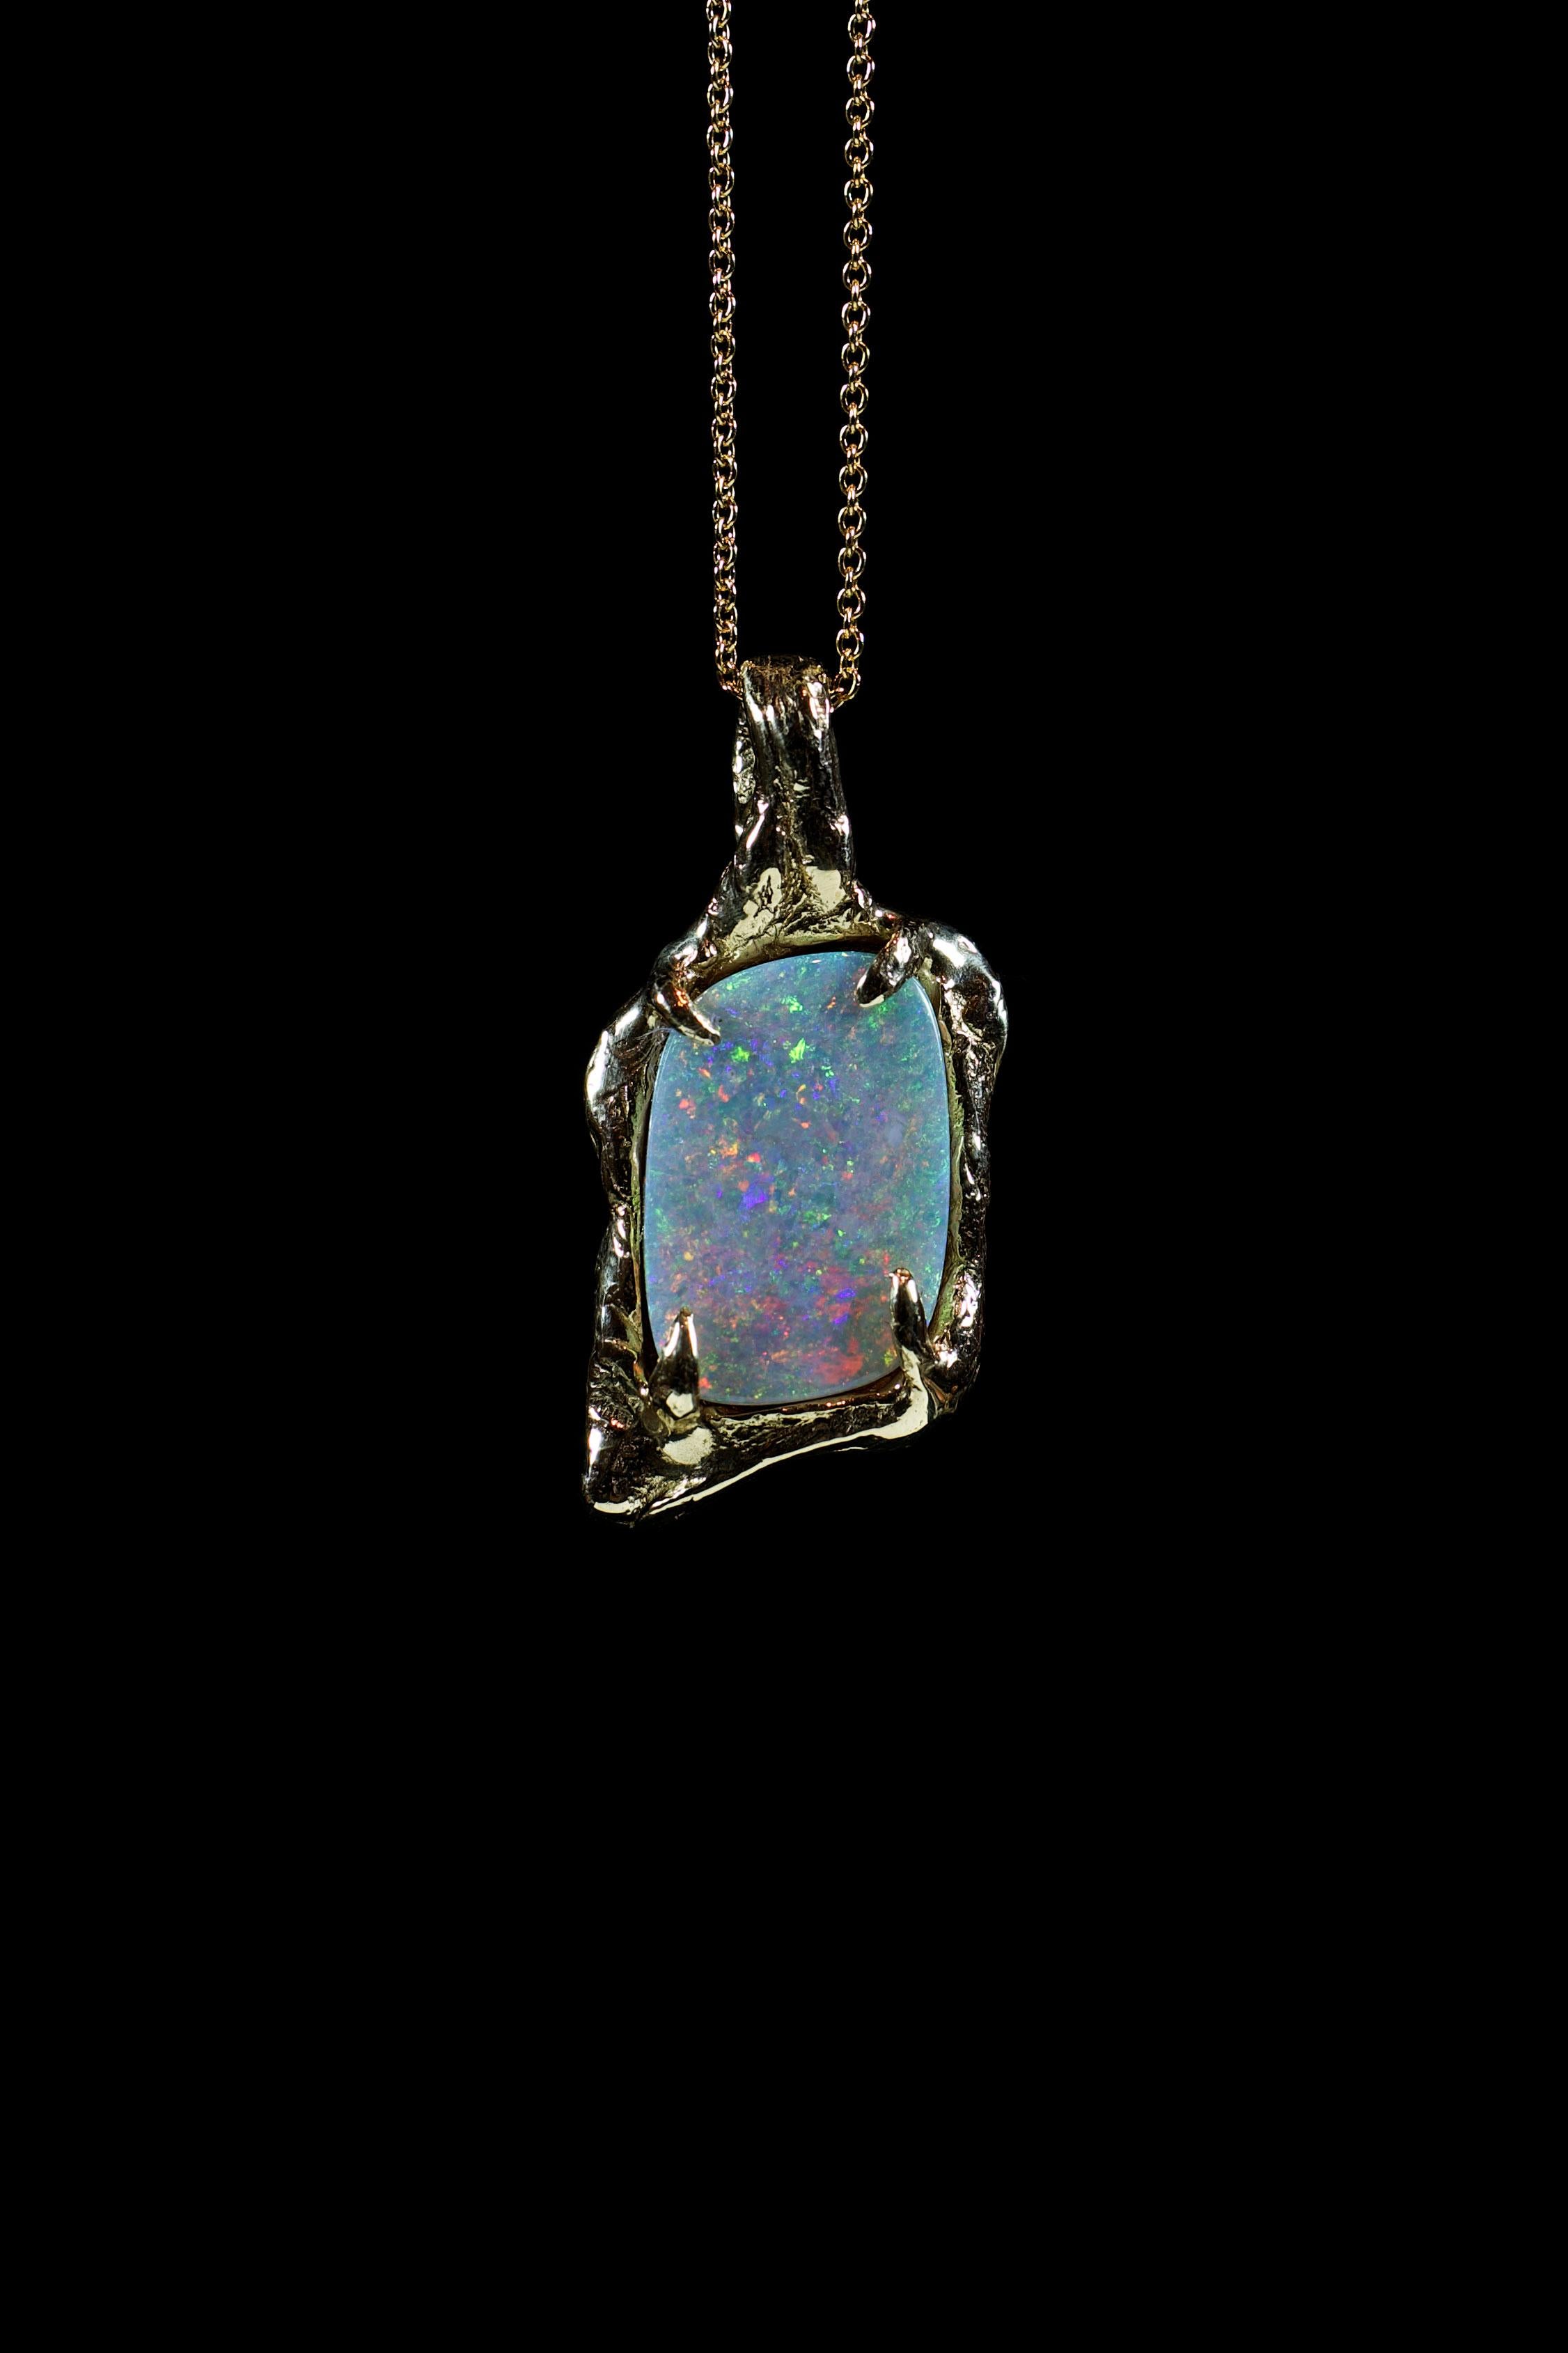 Opal World no. 1 is a breathtaking pendant crafted by Ken Fury from 10K solid yellow gold and adorned with a stunning genuine Australian precious opal. The unique and intricate design of the pendant showcases the opal's incredible play of color,